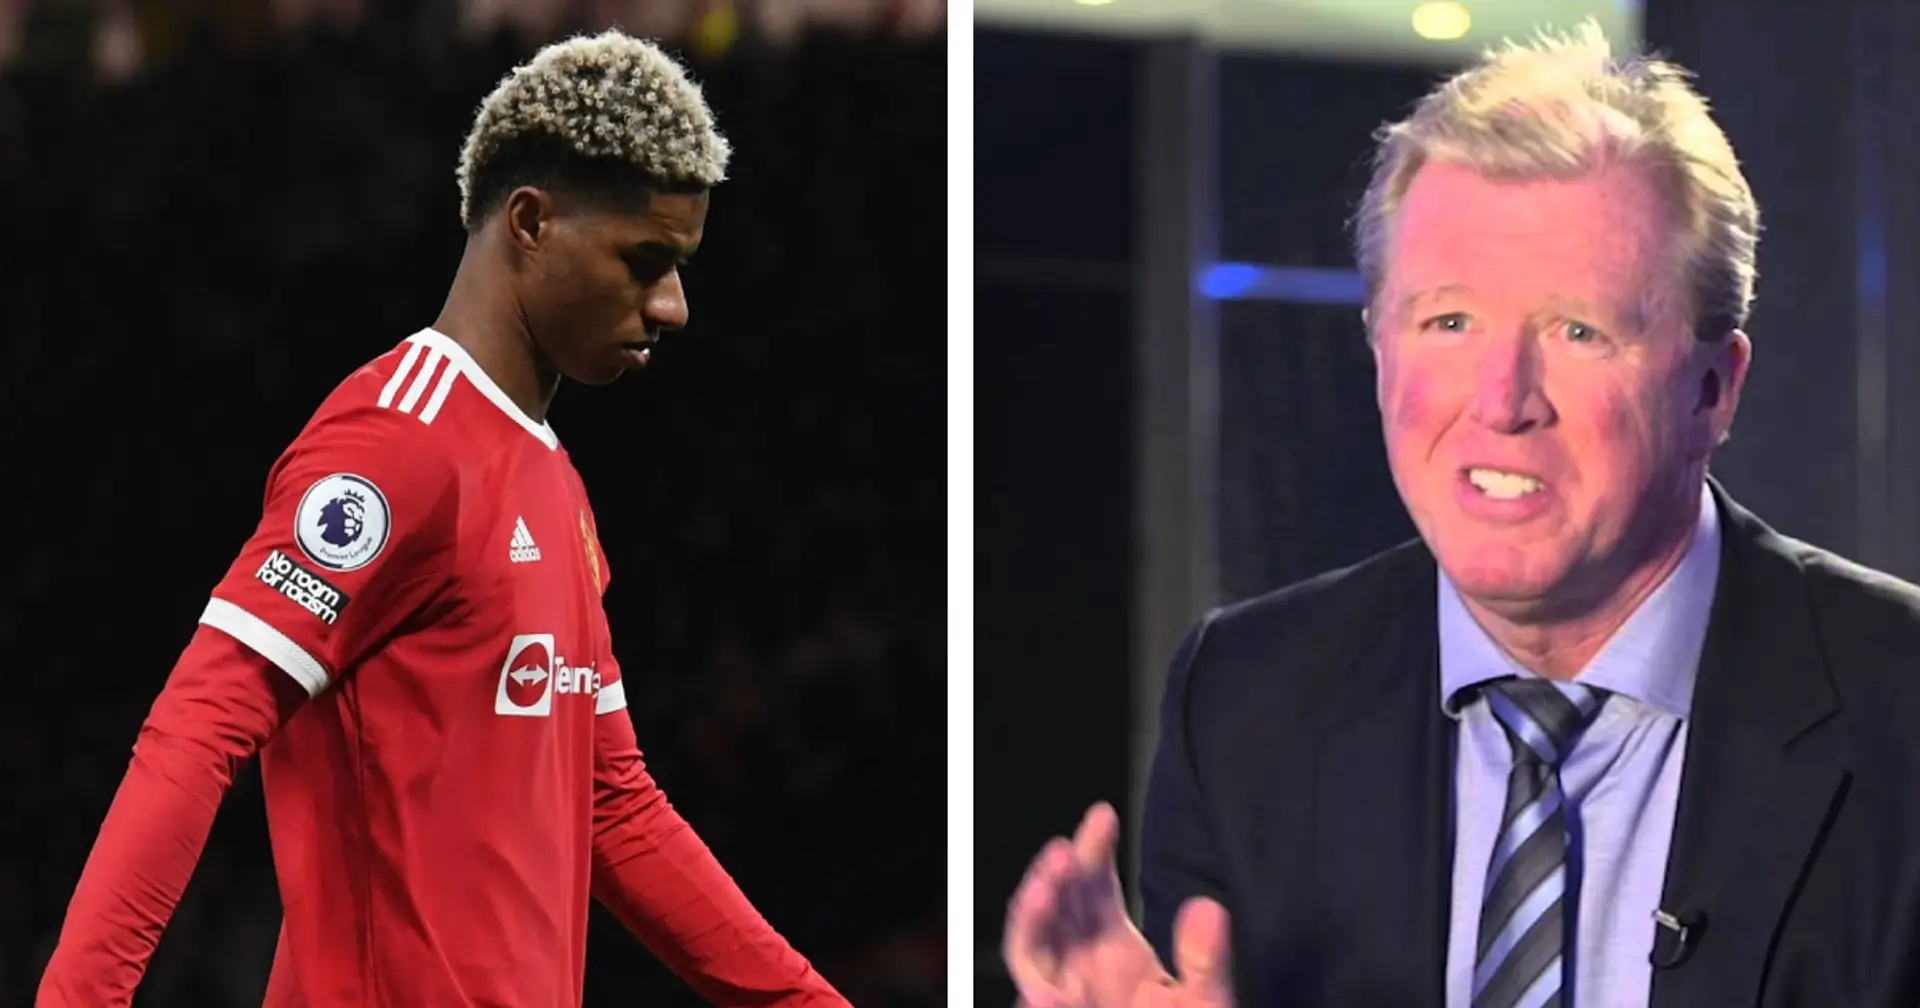 'I hate that attitude in a player': what Steve McClaren said about Rashford ahead of Man United reunion